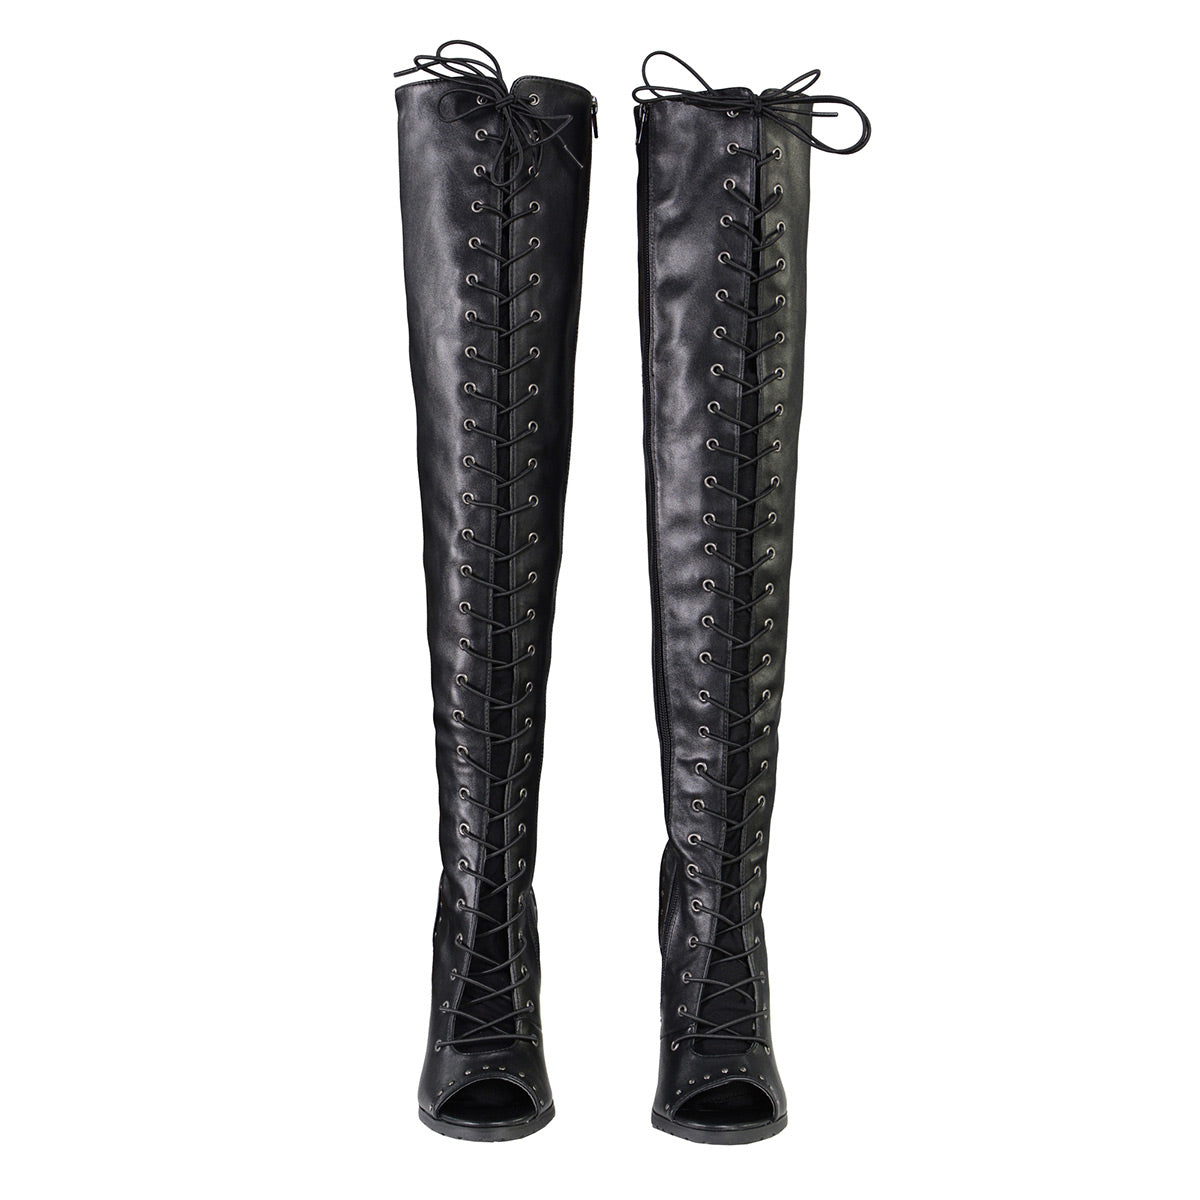 Milwaukee Performance MBL9421 Women's Black Lace-Up Knee-High Boots with Open Toe